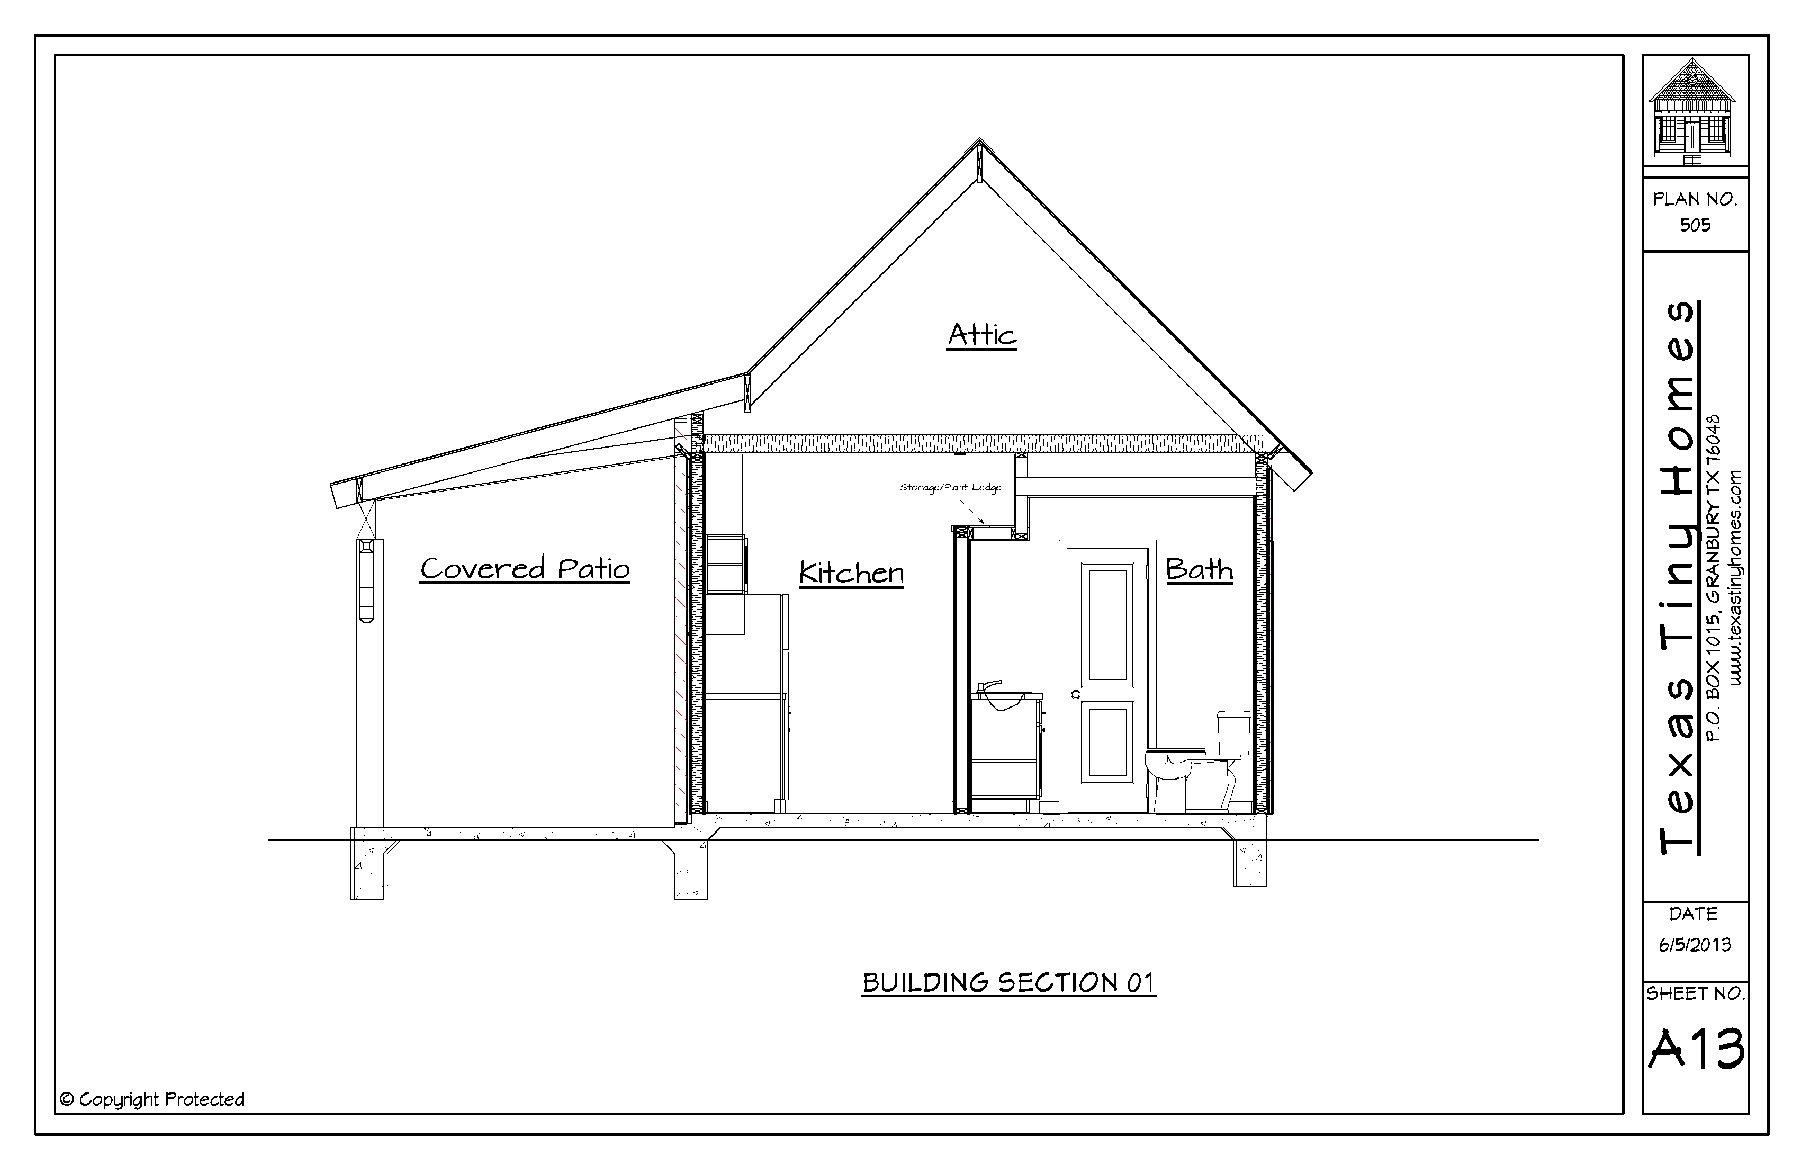 Tiny House Plans, Small House Plans, Small Home Plans, Guest House Plans, Mother In Law Suites, Mother In Law House Plans, Small Homes Texas, Texas Tiny Homes, Fort Worth Tiny Homes,